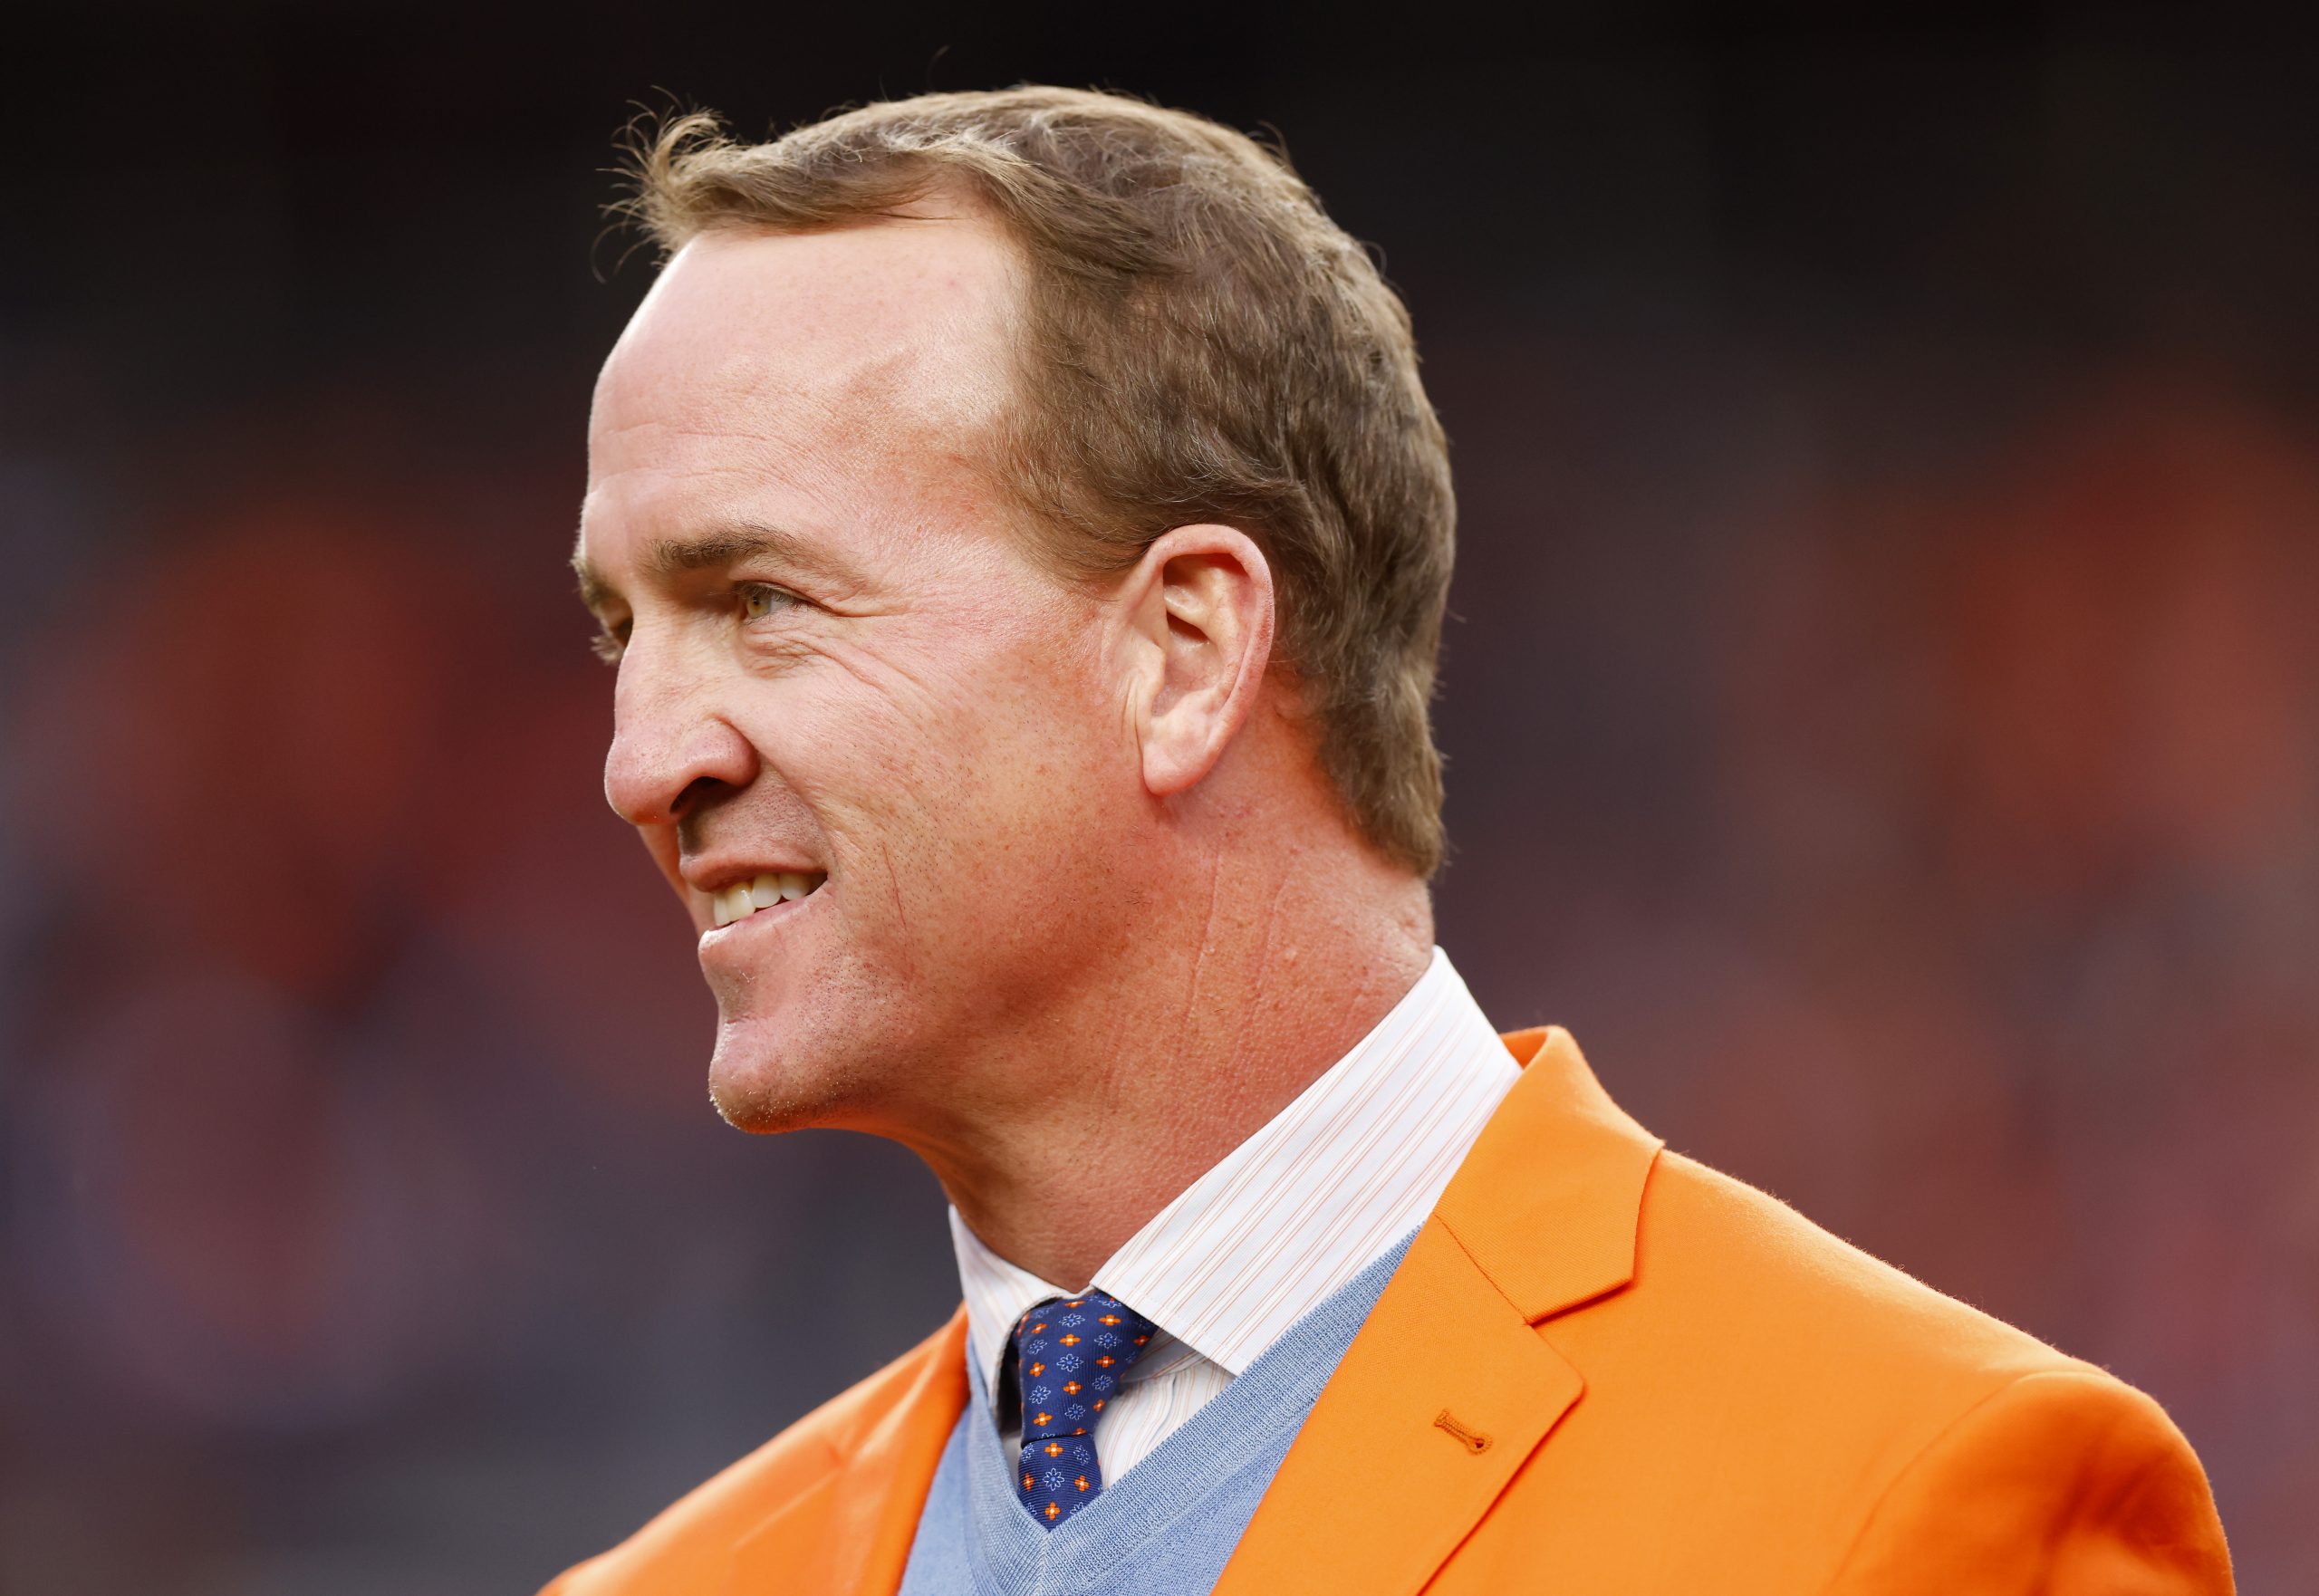 DENVER, COLORADO - OCTOBER 31: Peyton Manning looks on during a Ring of Honor induction ceremony at...